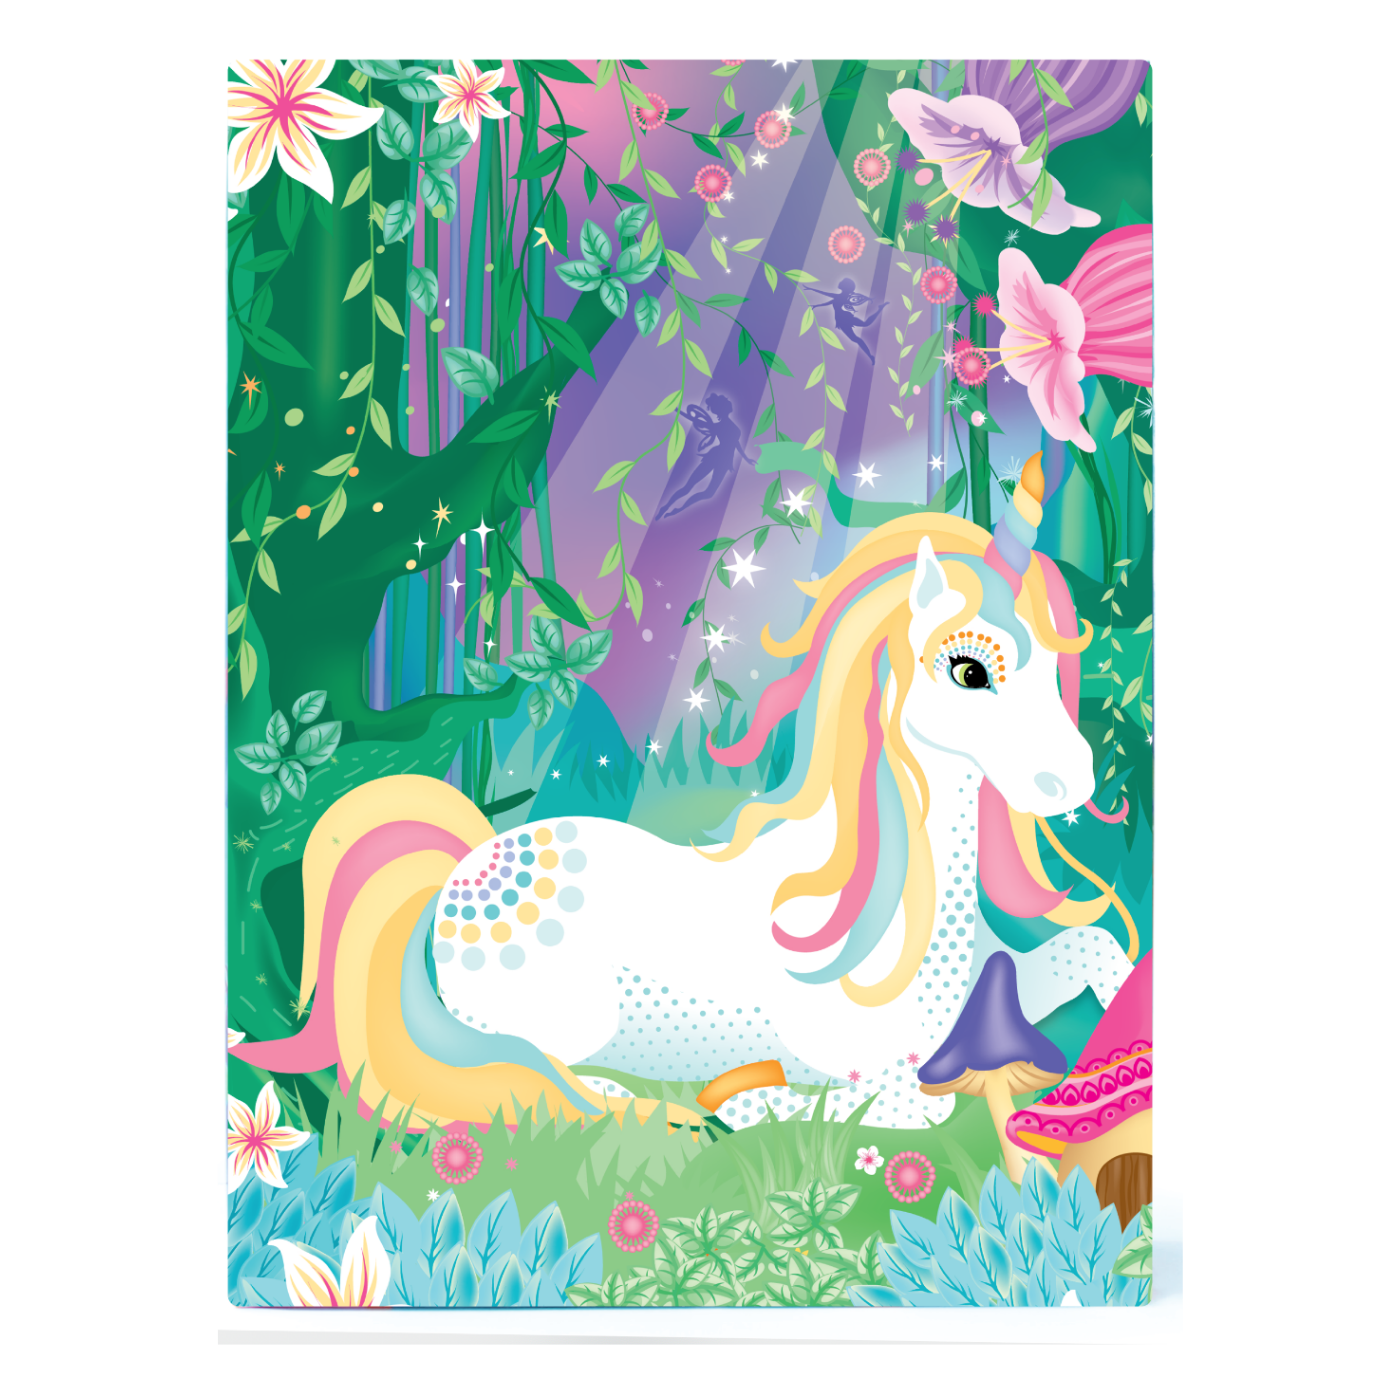 Enchanting Unicorn Art Box: A Magical Collection of Colorful Possibili